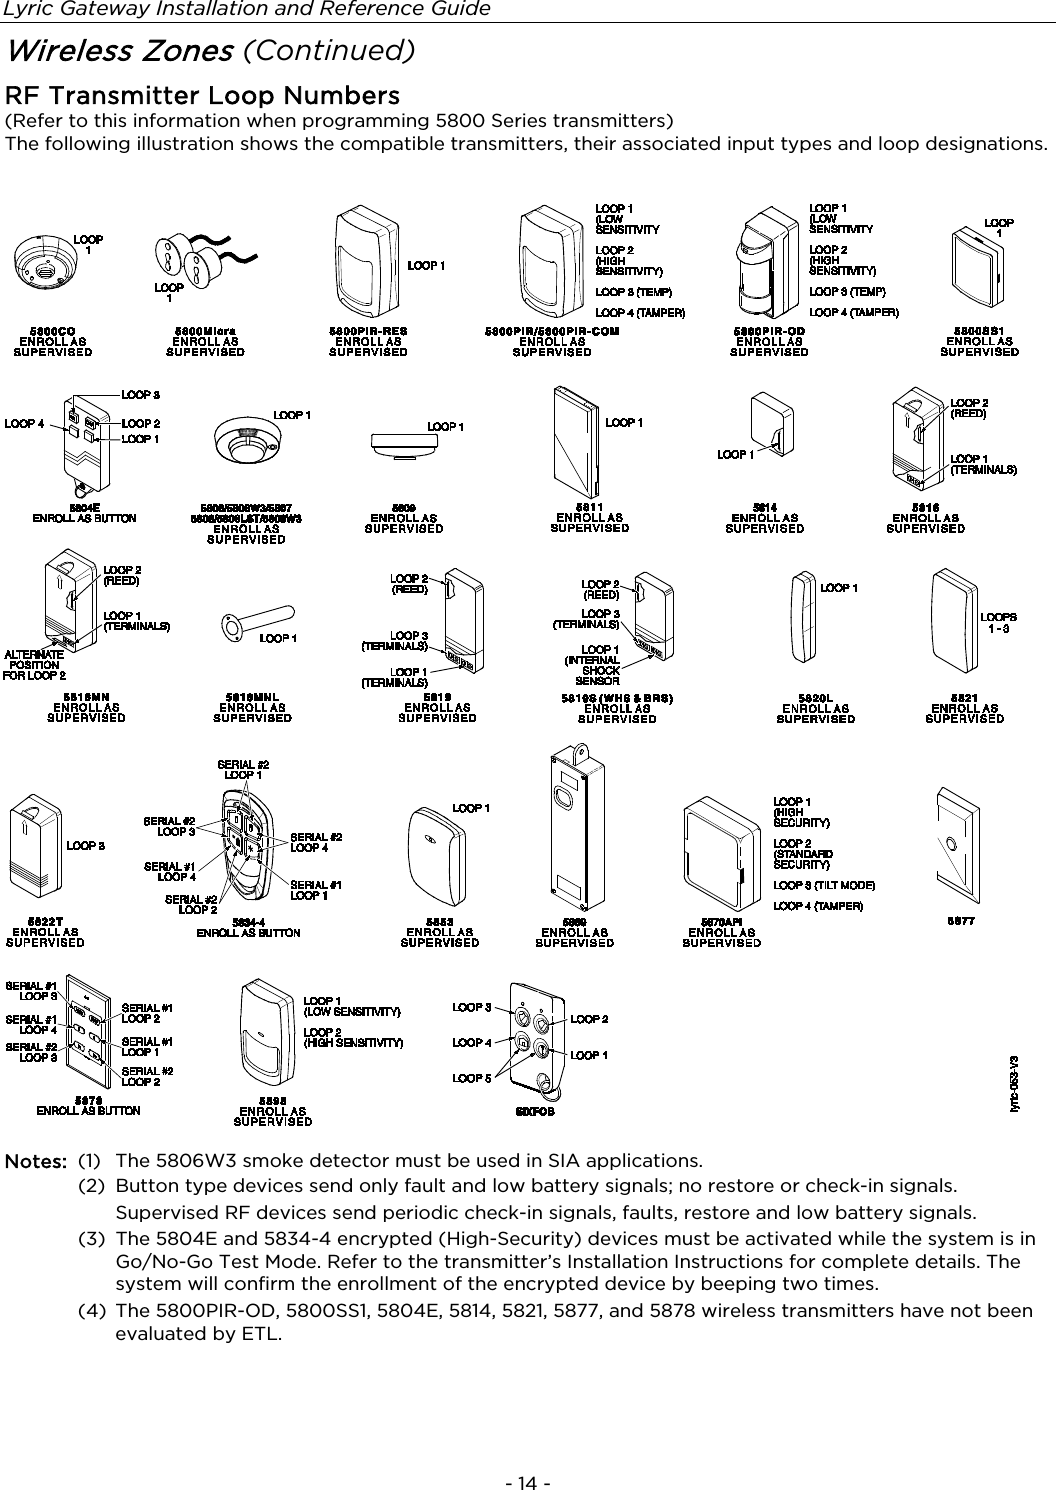 Lyric Gateway Installation and Reference Guide  - 14 - Wireless Zones (Continued) RF Transmitter Loop Numbers  (Refer to this information when programming 5800 Series transmitters) The following illustration shows the compatible transmitters, their associated input types and loop designations.    Notes: (1) The 5806W3 smoke detector must be used in SIA applications.  (2) Button type devices send only fault and low battery signals; no restore or check-in signals.     Supervised RF devices send periodic check-in signals, faults, restore and low battery signals.  (3)  The 5804E and 5834-4 encrypted (High-Security) devices must be activated while the system is in Go/No-Go Test Mode. Refer to the transmitter’s Installation Instructions for complete details. The system will confirm the enrollment of the encrypted device by beeping two times. (4) The 5800PIR-OD, 5800SS1, 5804E, 5814, 5821, 5877, and 5878 wireless transmitters have not been evaluated by ETL.   